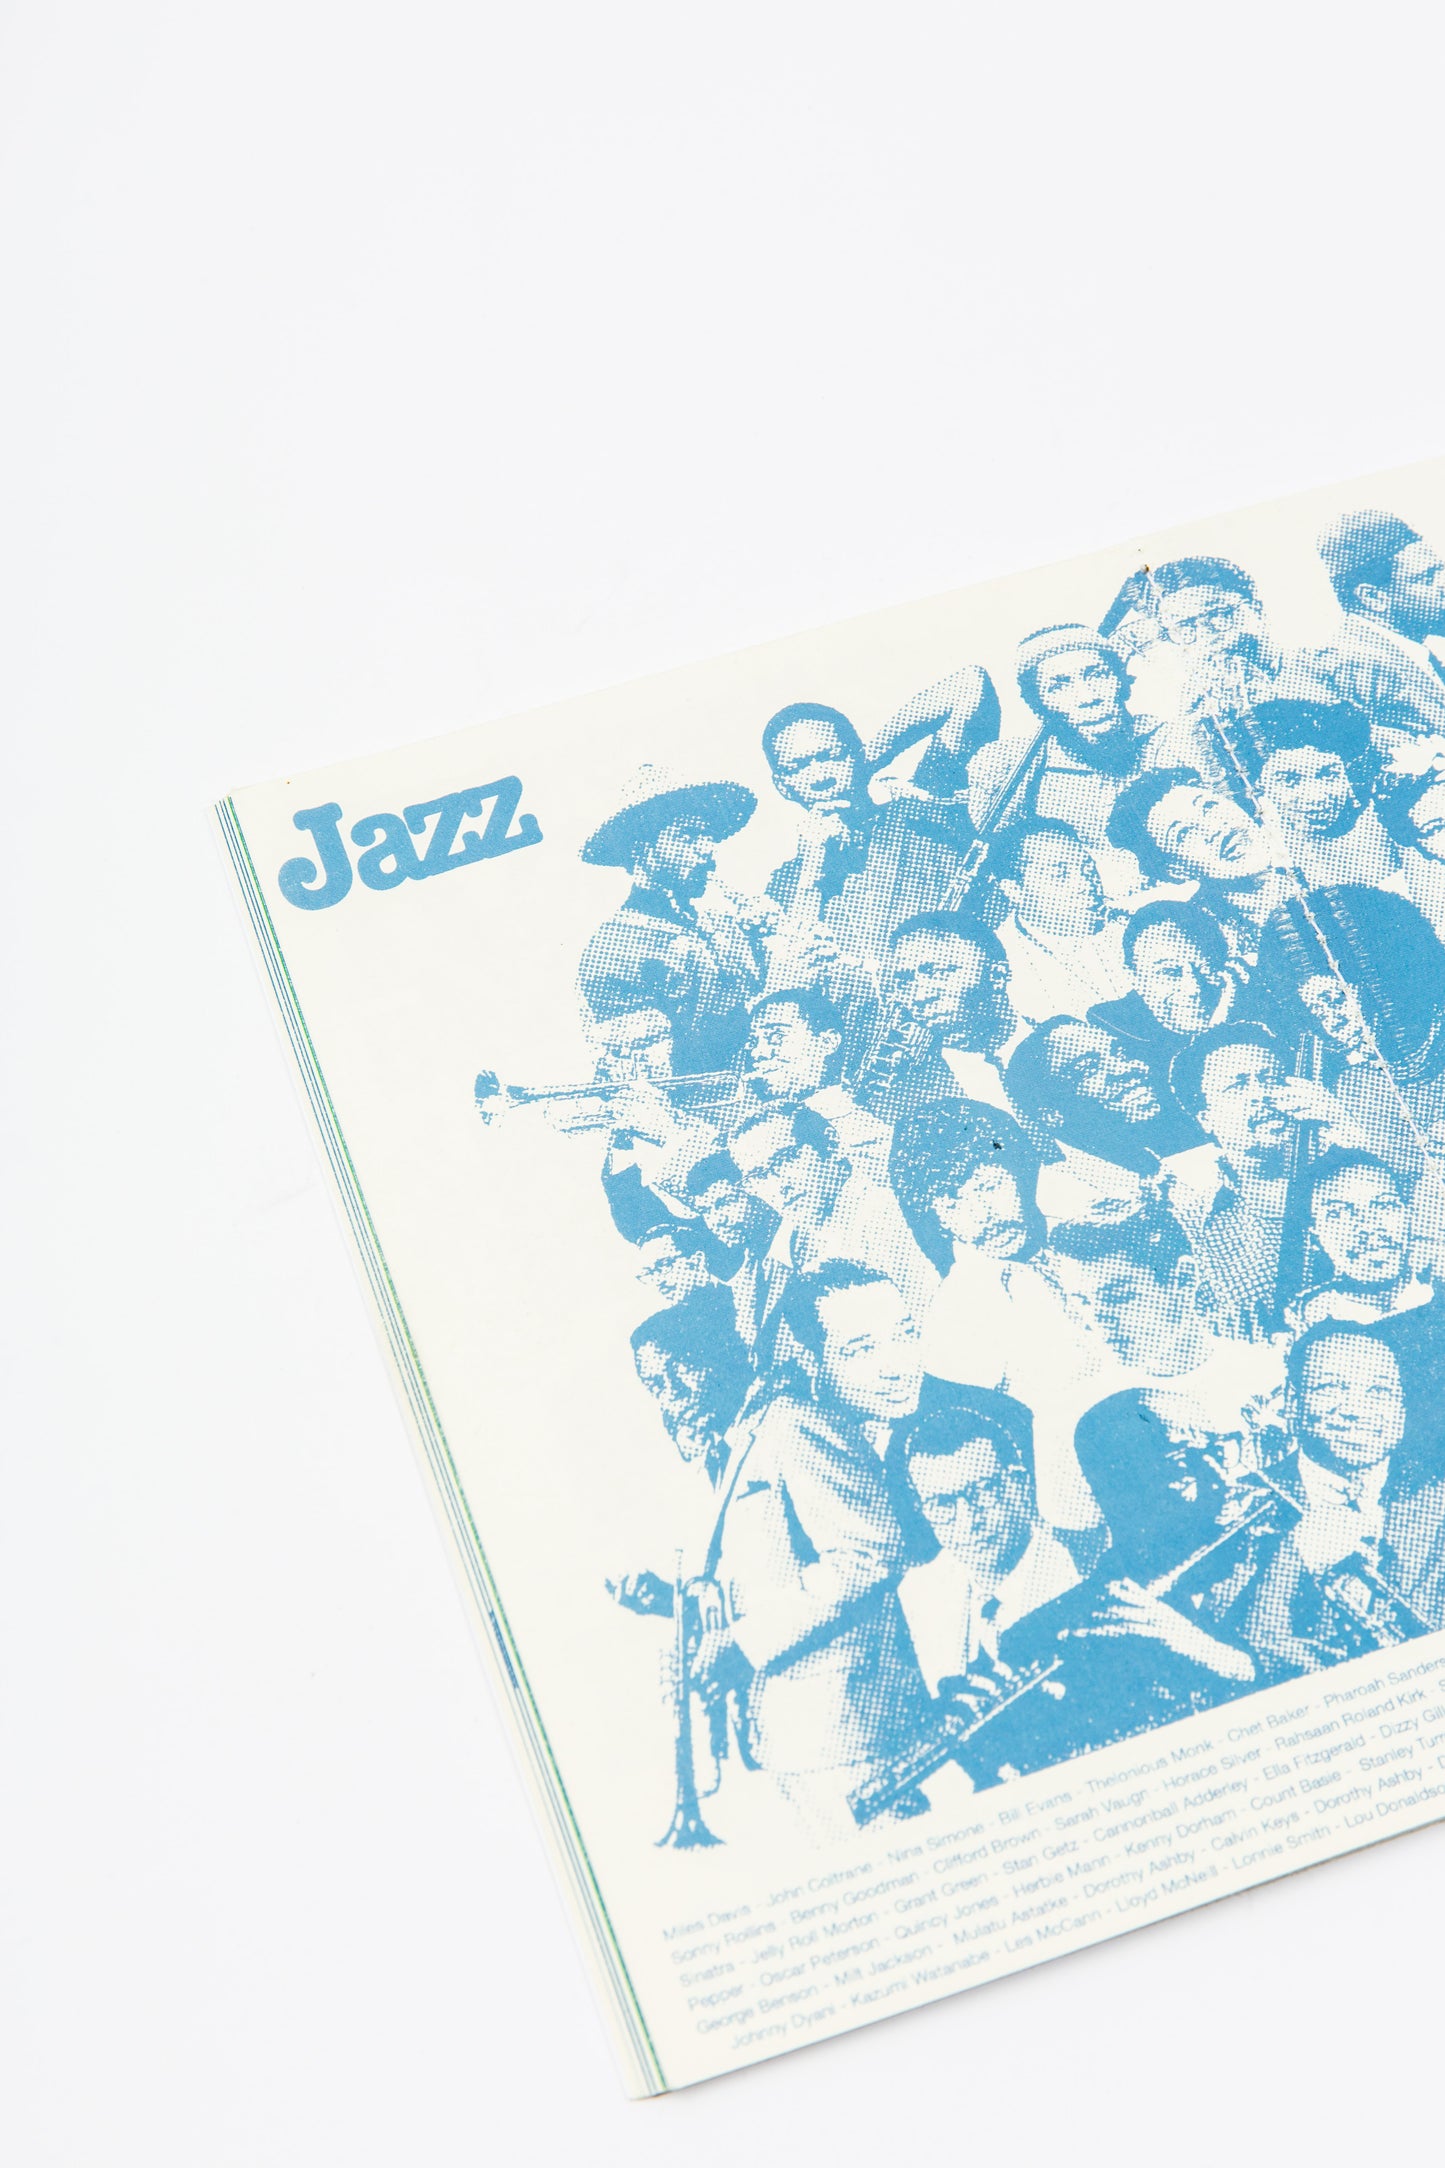 The Graphic Alphabet Book Of Music